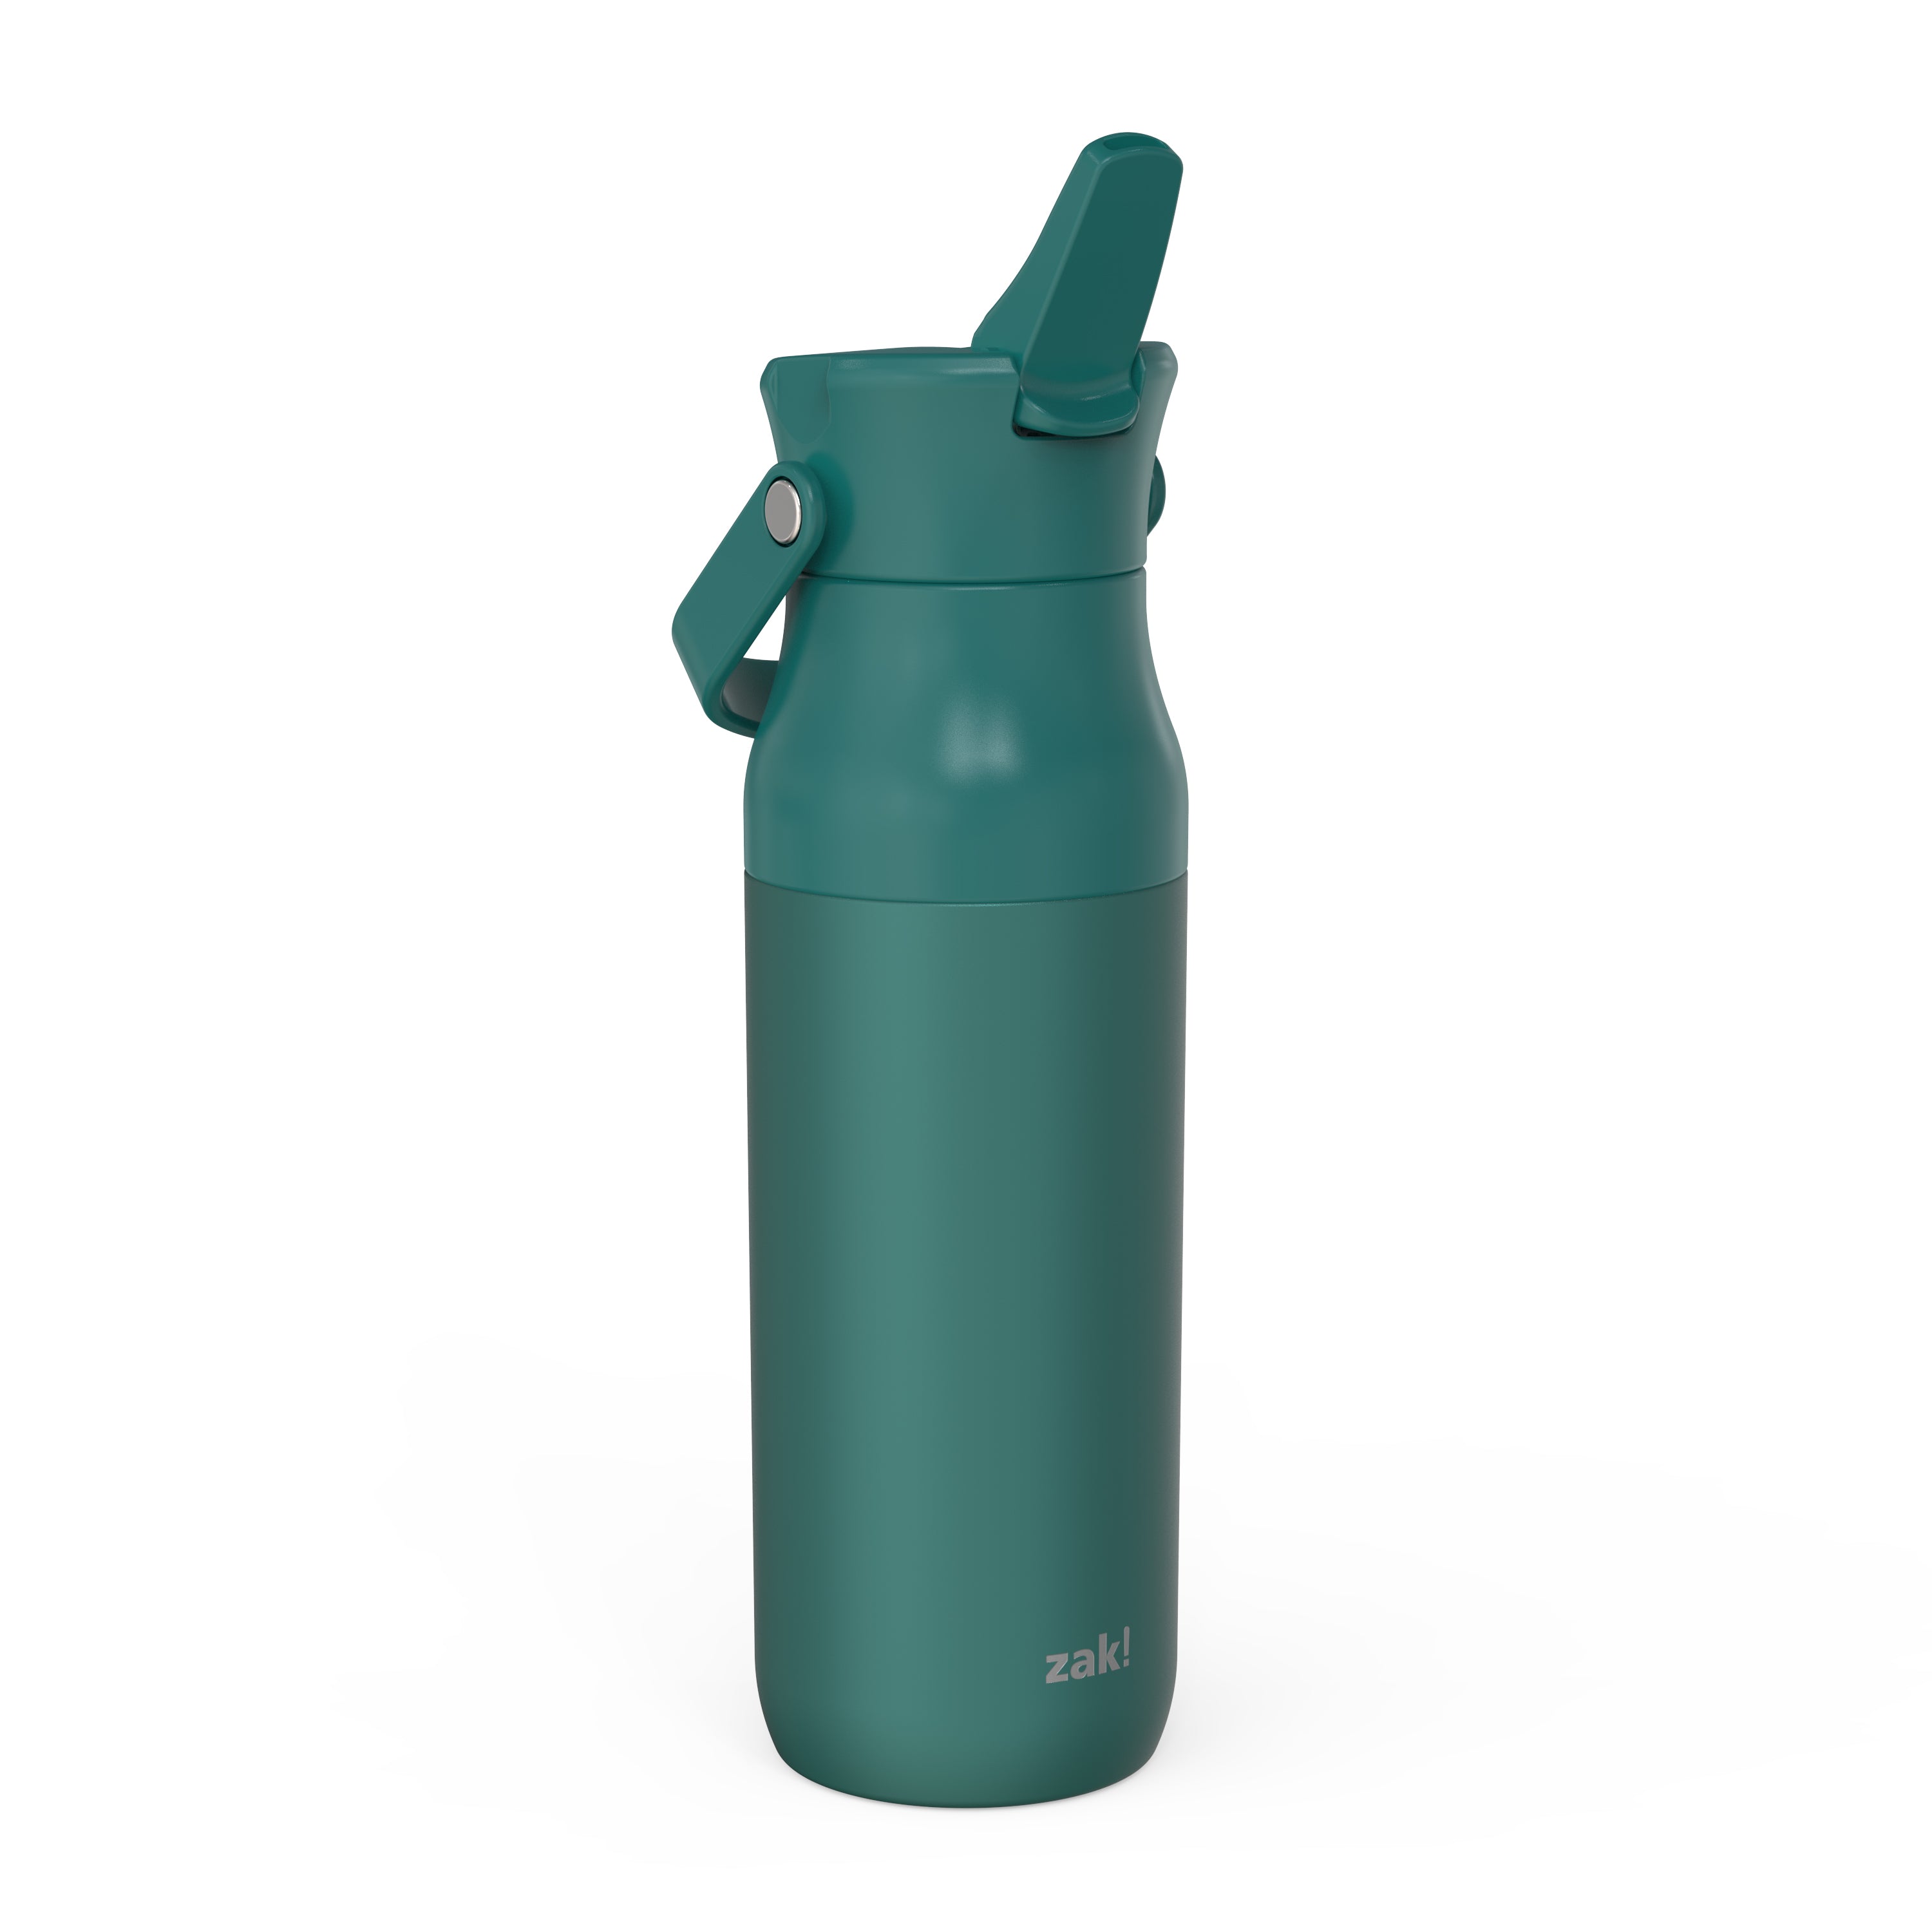 Harmony Recycled Stainless Steel Insulated Water Bottle with Flip-Up Straw Spout - Emerald, 32 ounces